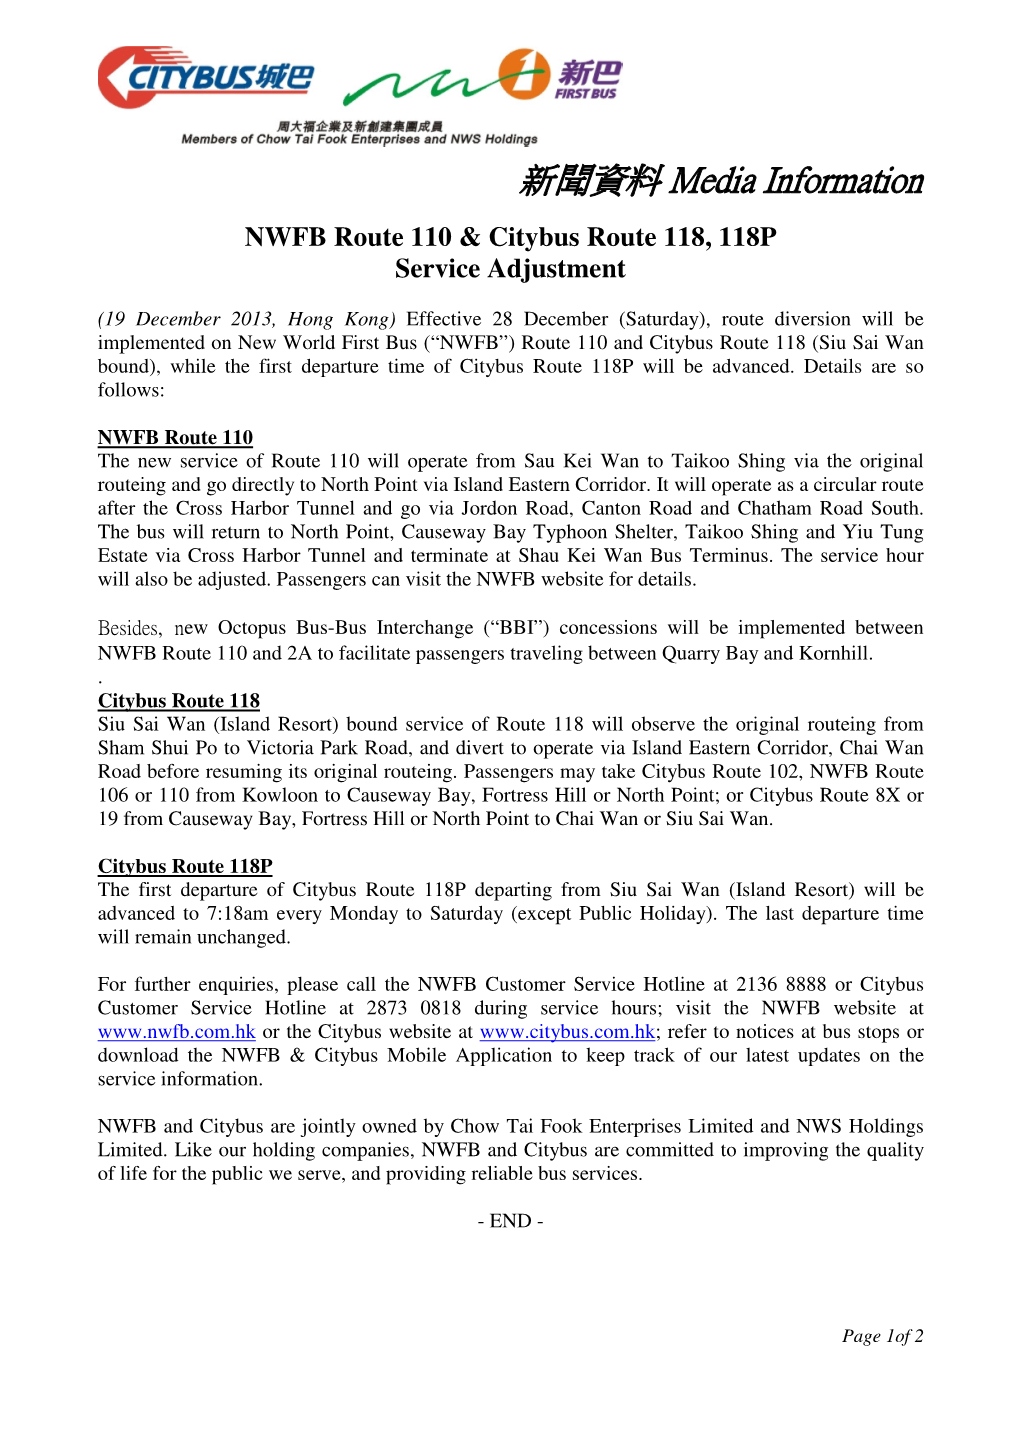 NWFB Route 110 & Citybus Route 118, 118P Service Adjustment